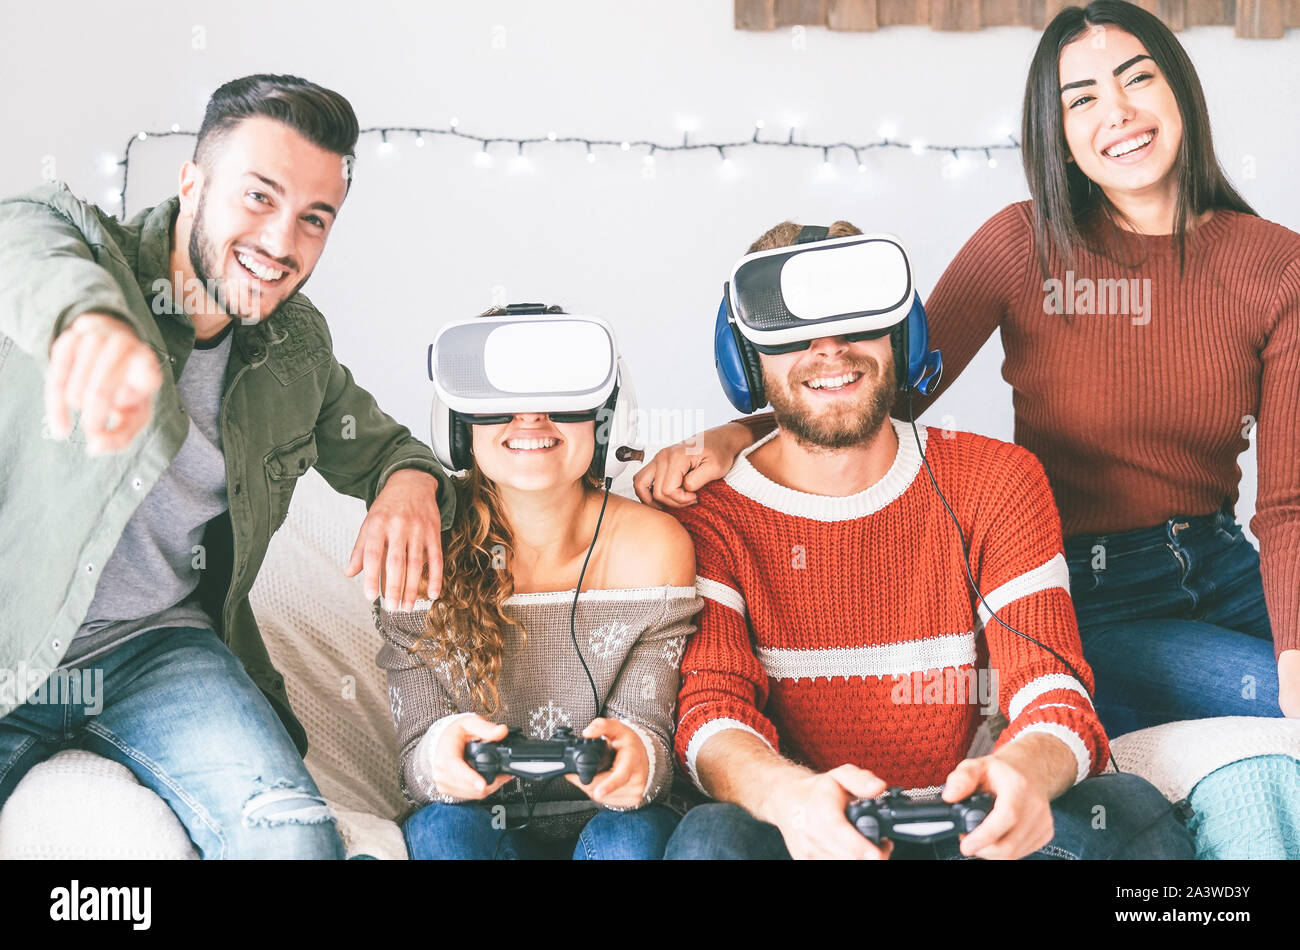 Happy millennials friends playing video games with virtual reality headset - Young people having fun with new vr online trend technology Stock Photo